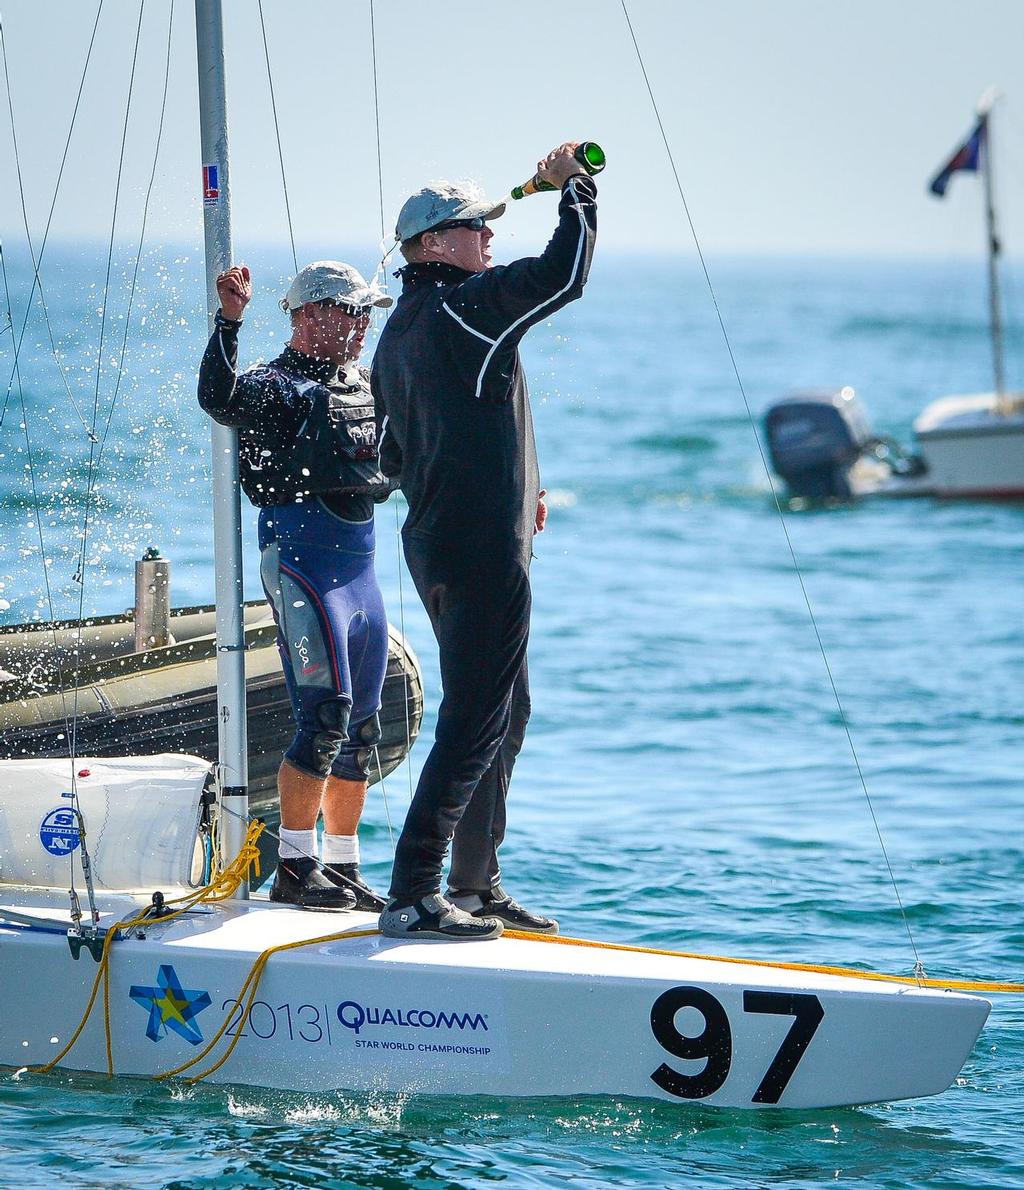 John MacCausland and Phil Trinter celebrate at the 2013 Qualcomm Star World Championship,San Diego Yacht Club - Day 6<br />
 ©  Marc Rouiller/StarWorlds2013